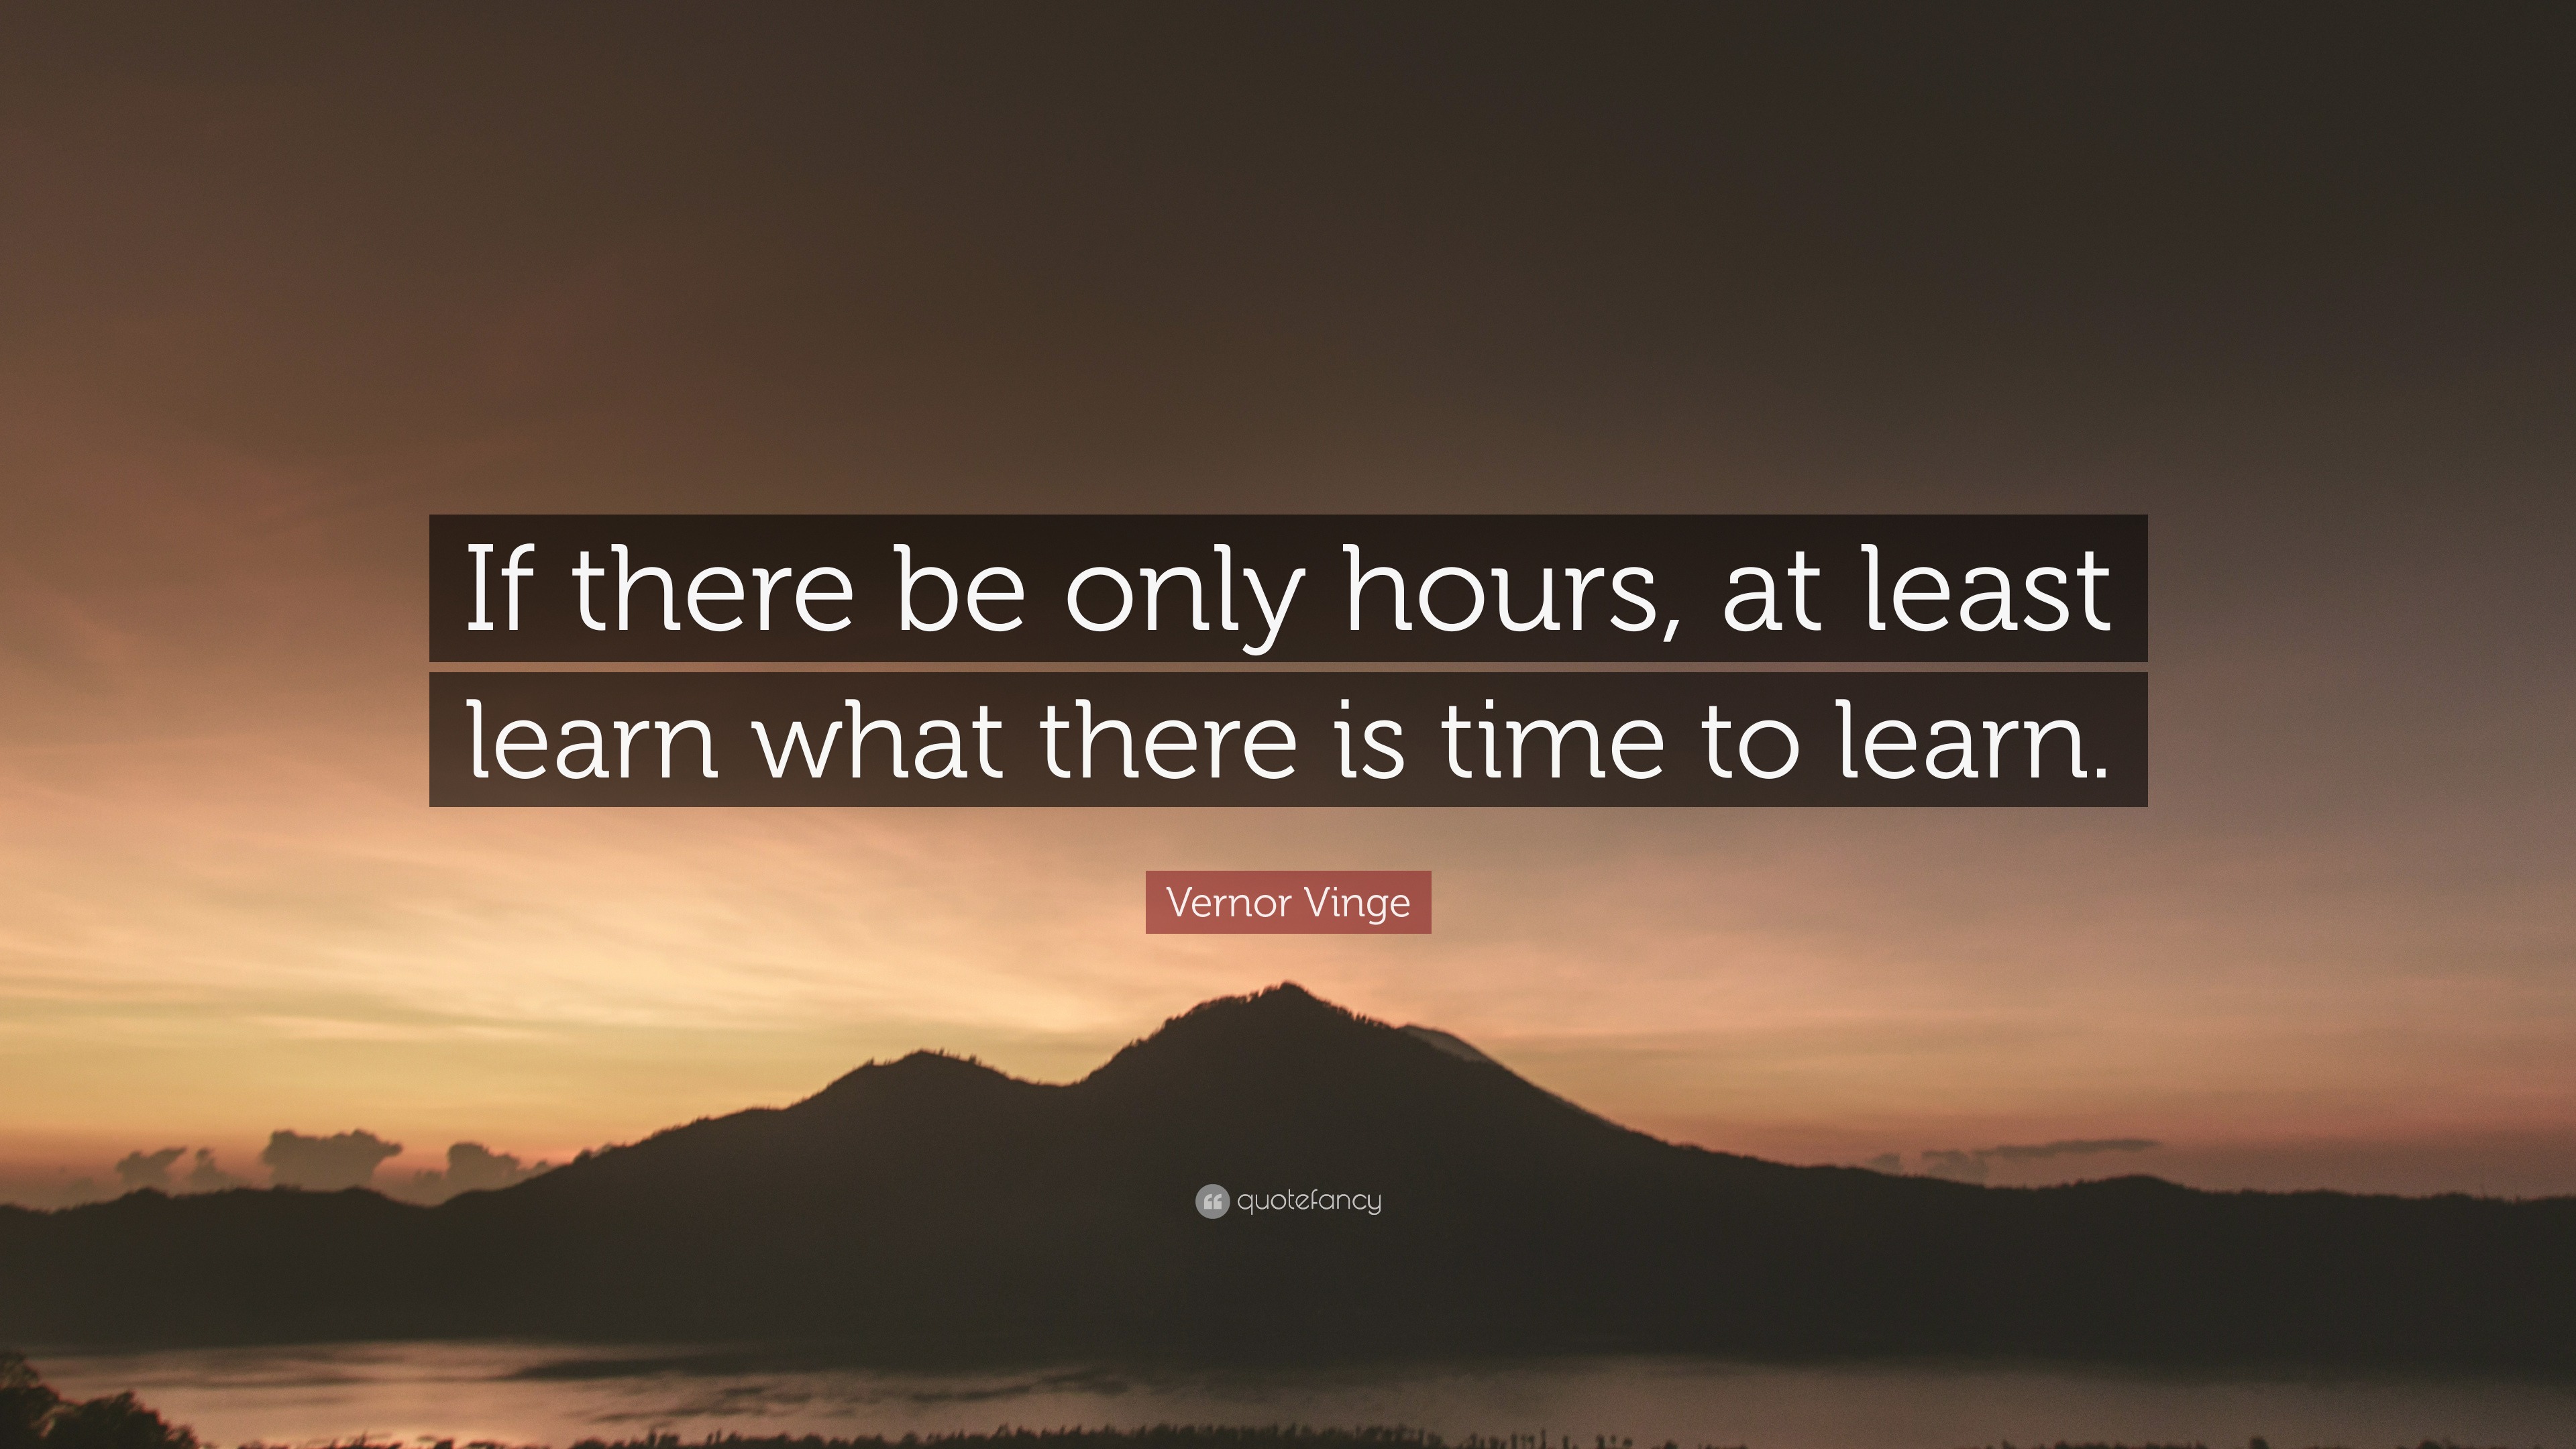 https://quotefancy.com/media/wallpaper/3840x2160/3133138-Vernor-Vinge-Quote-If-there-be-only-hours-at-least-learn-what.jpg